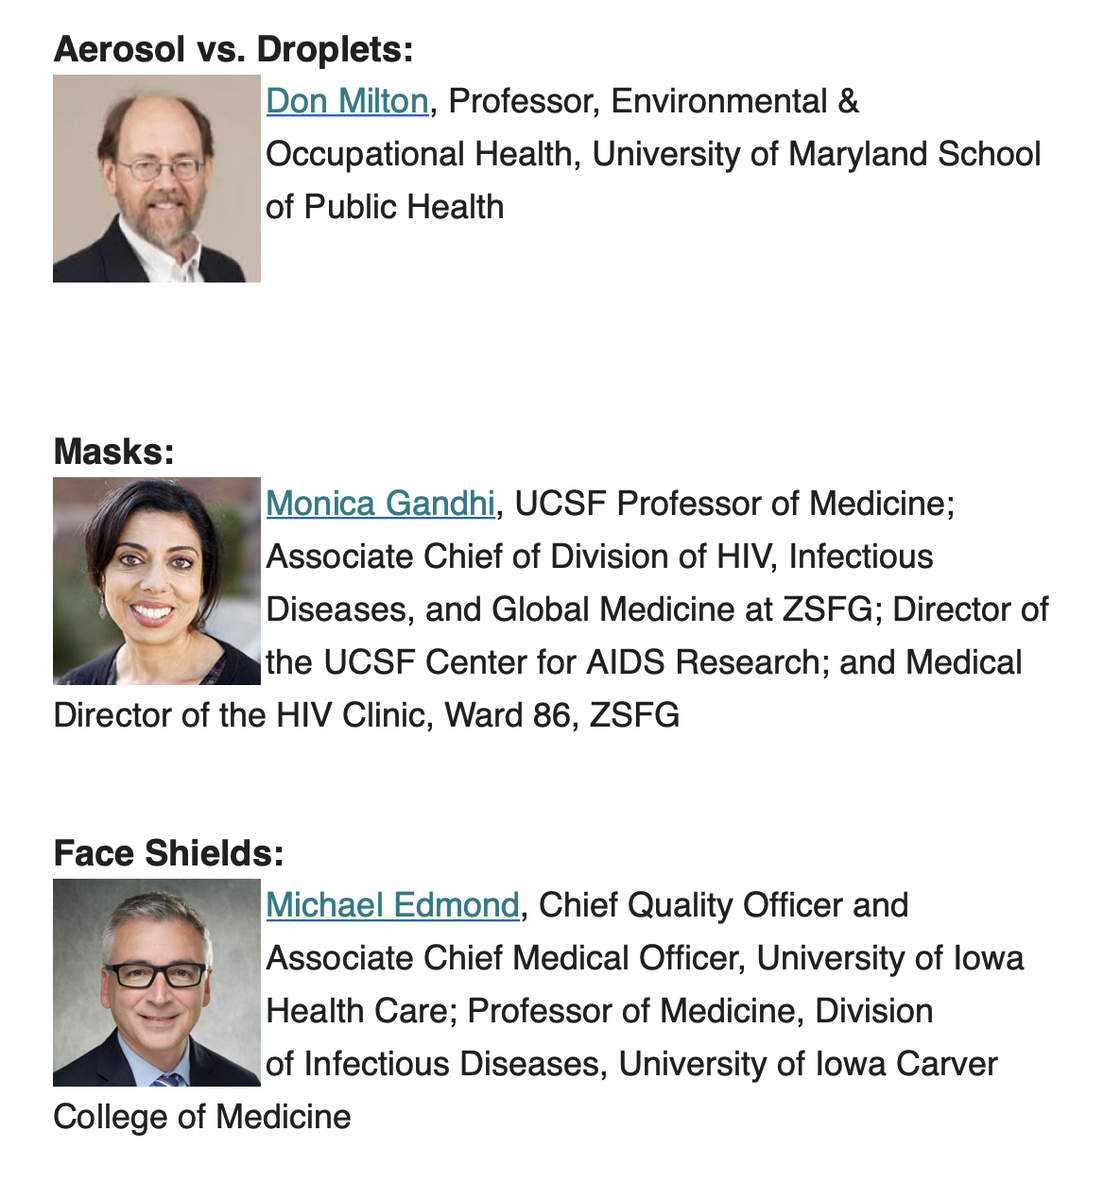 11/ That's it for now. Tomorrow back w/ what should be fascinating  @ucsf medical grand rounds: aerosol vs. droplets, masks, and face shields (program below). Live for UCSFers at noon; should be up on youtube ~7:30pm if Twitter is open. Back Friday for weekly roundup.Stay safe.